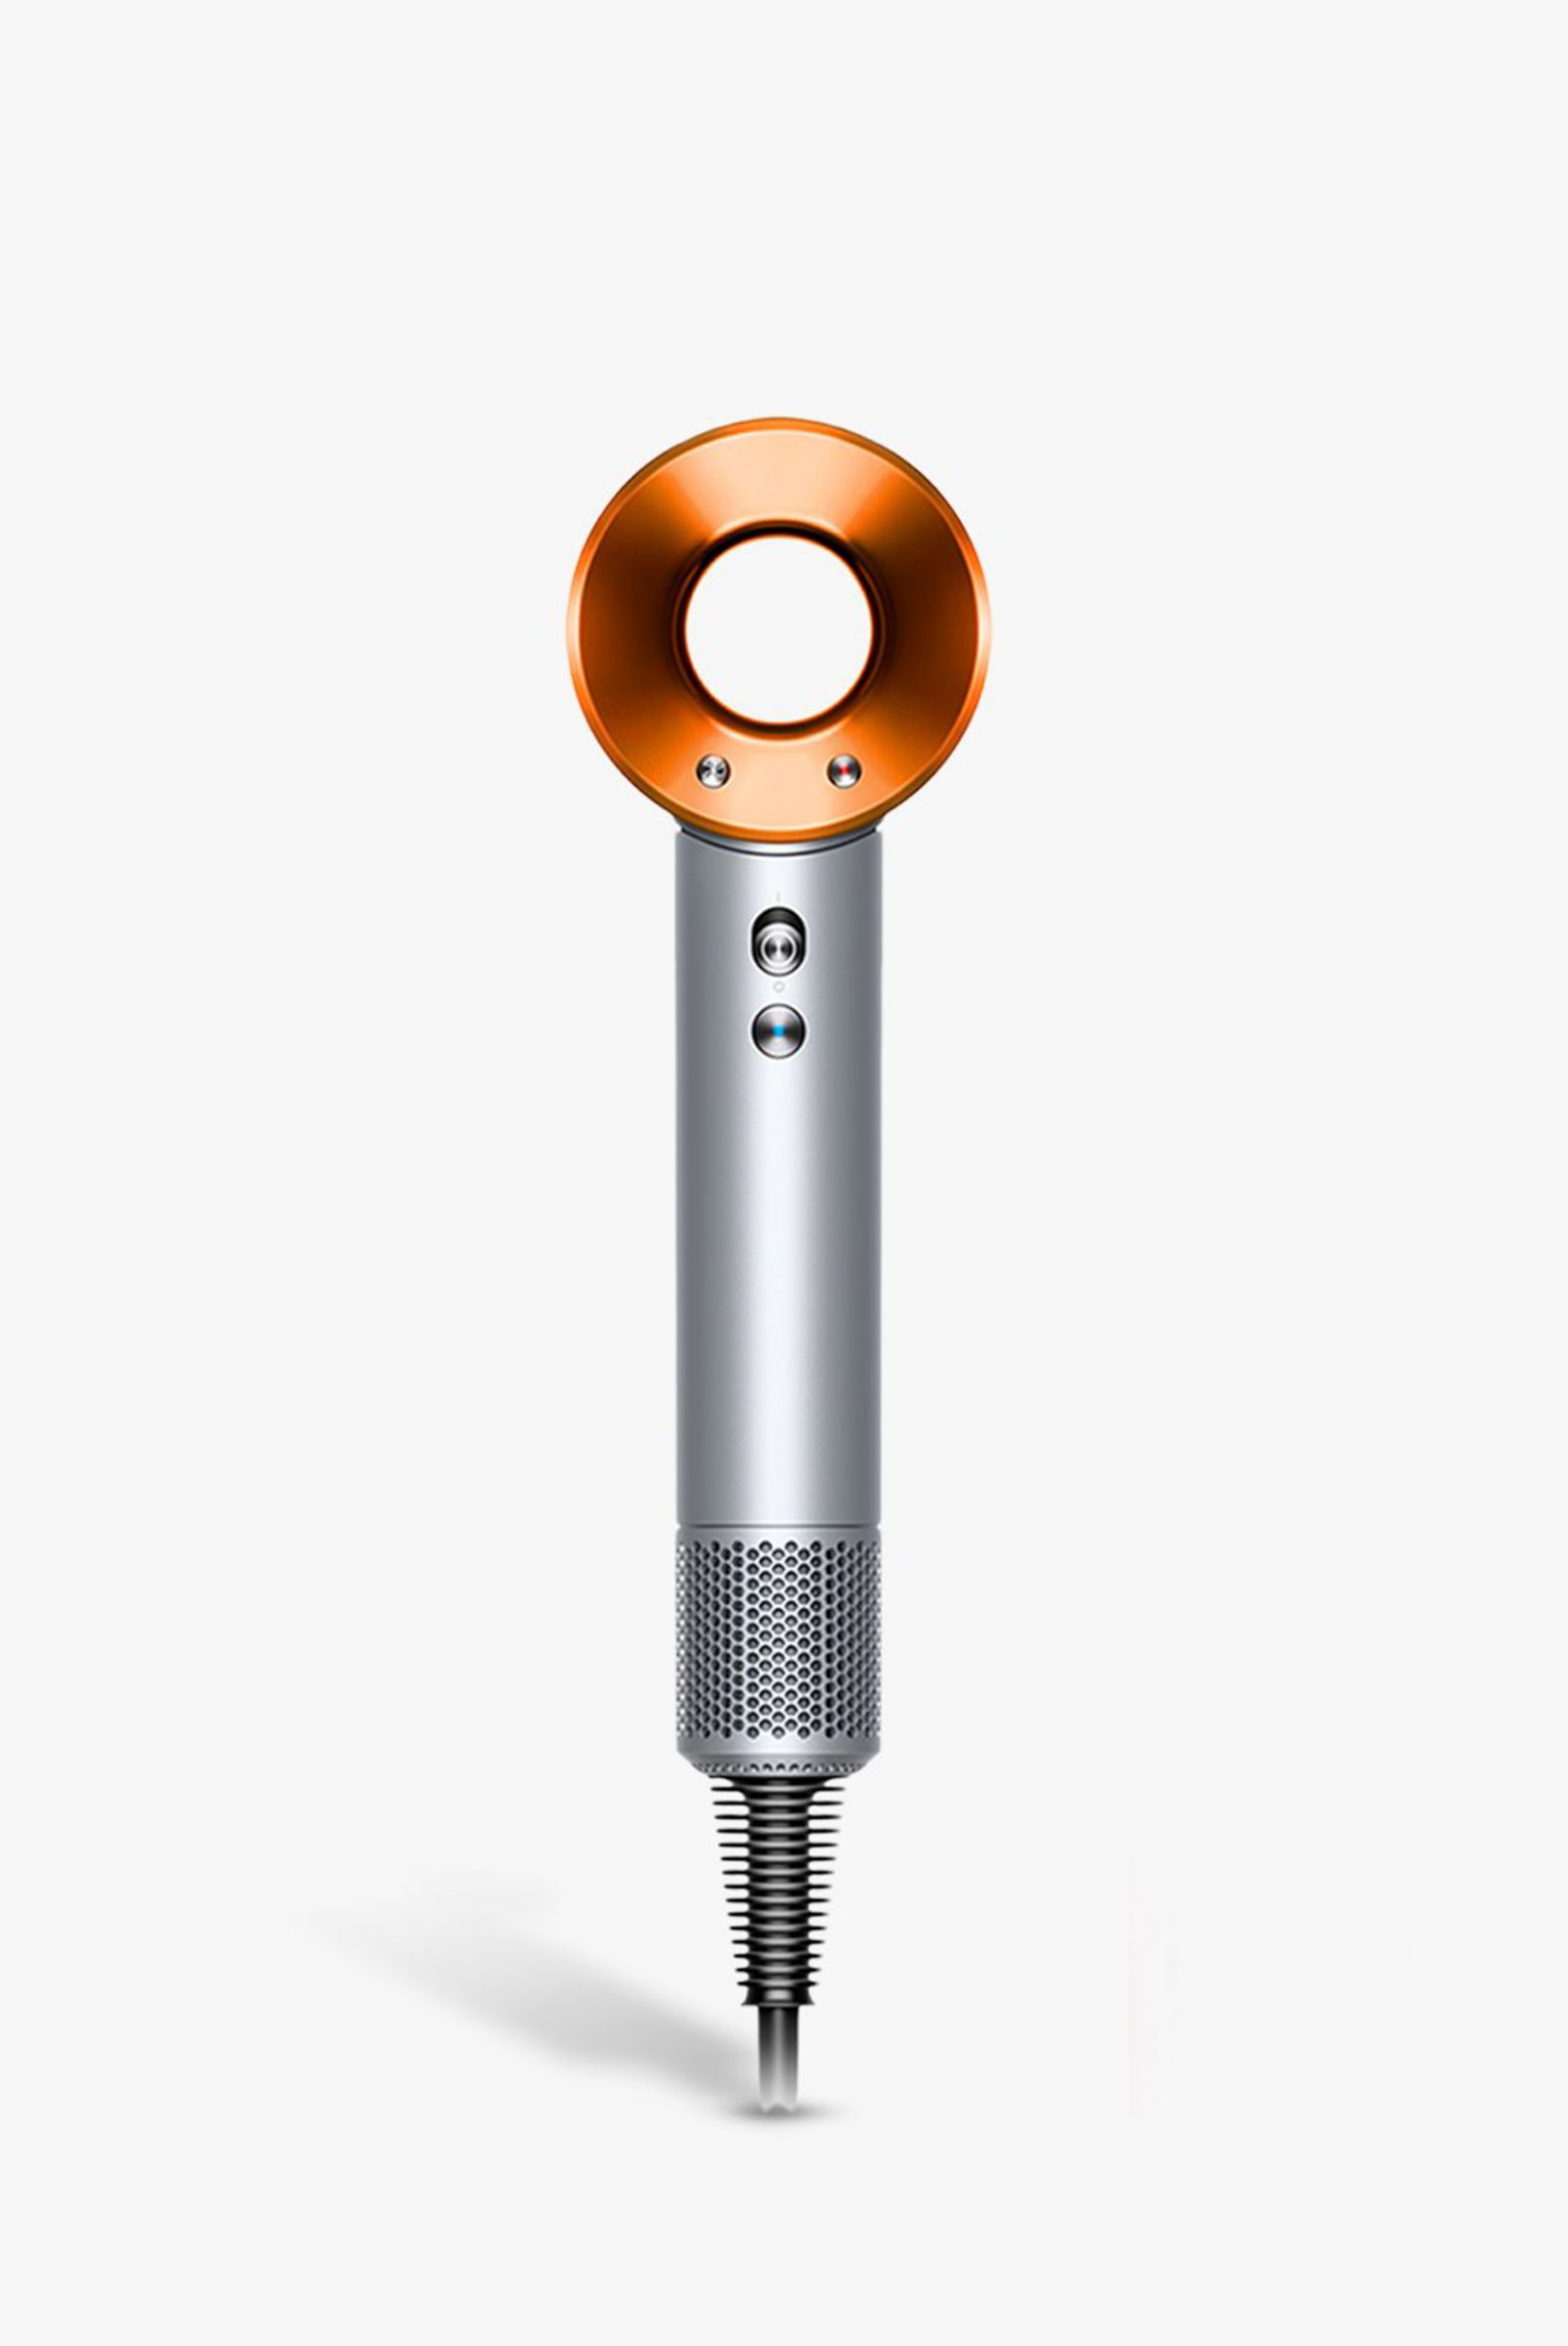 Dyson Supersonic™ Hair Dryer Exclusive Copper Gift Edition with Travel Bag, £299